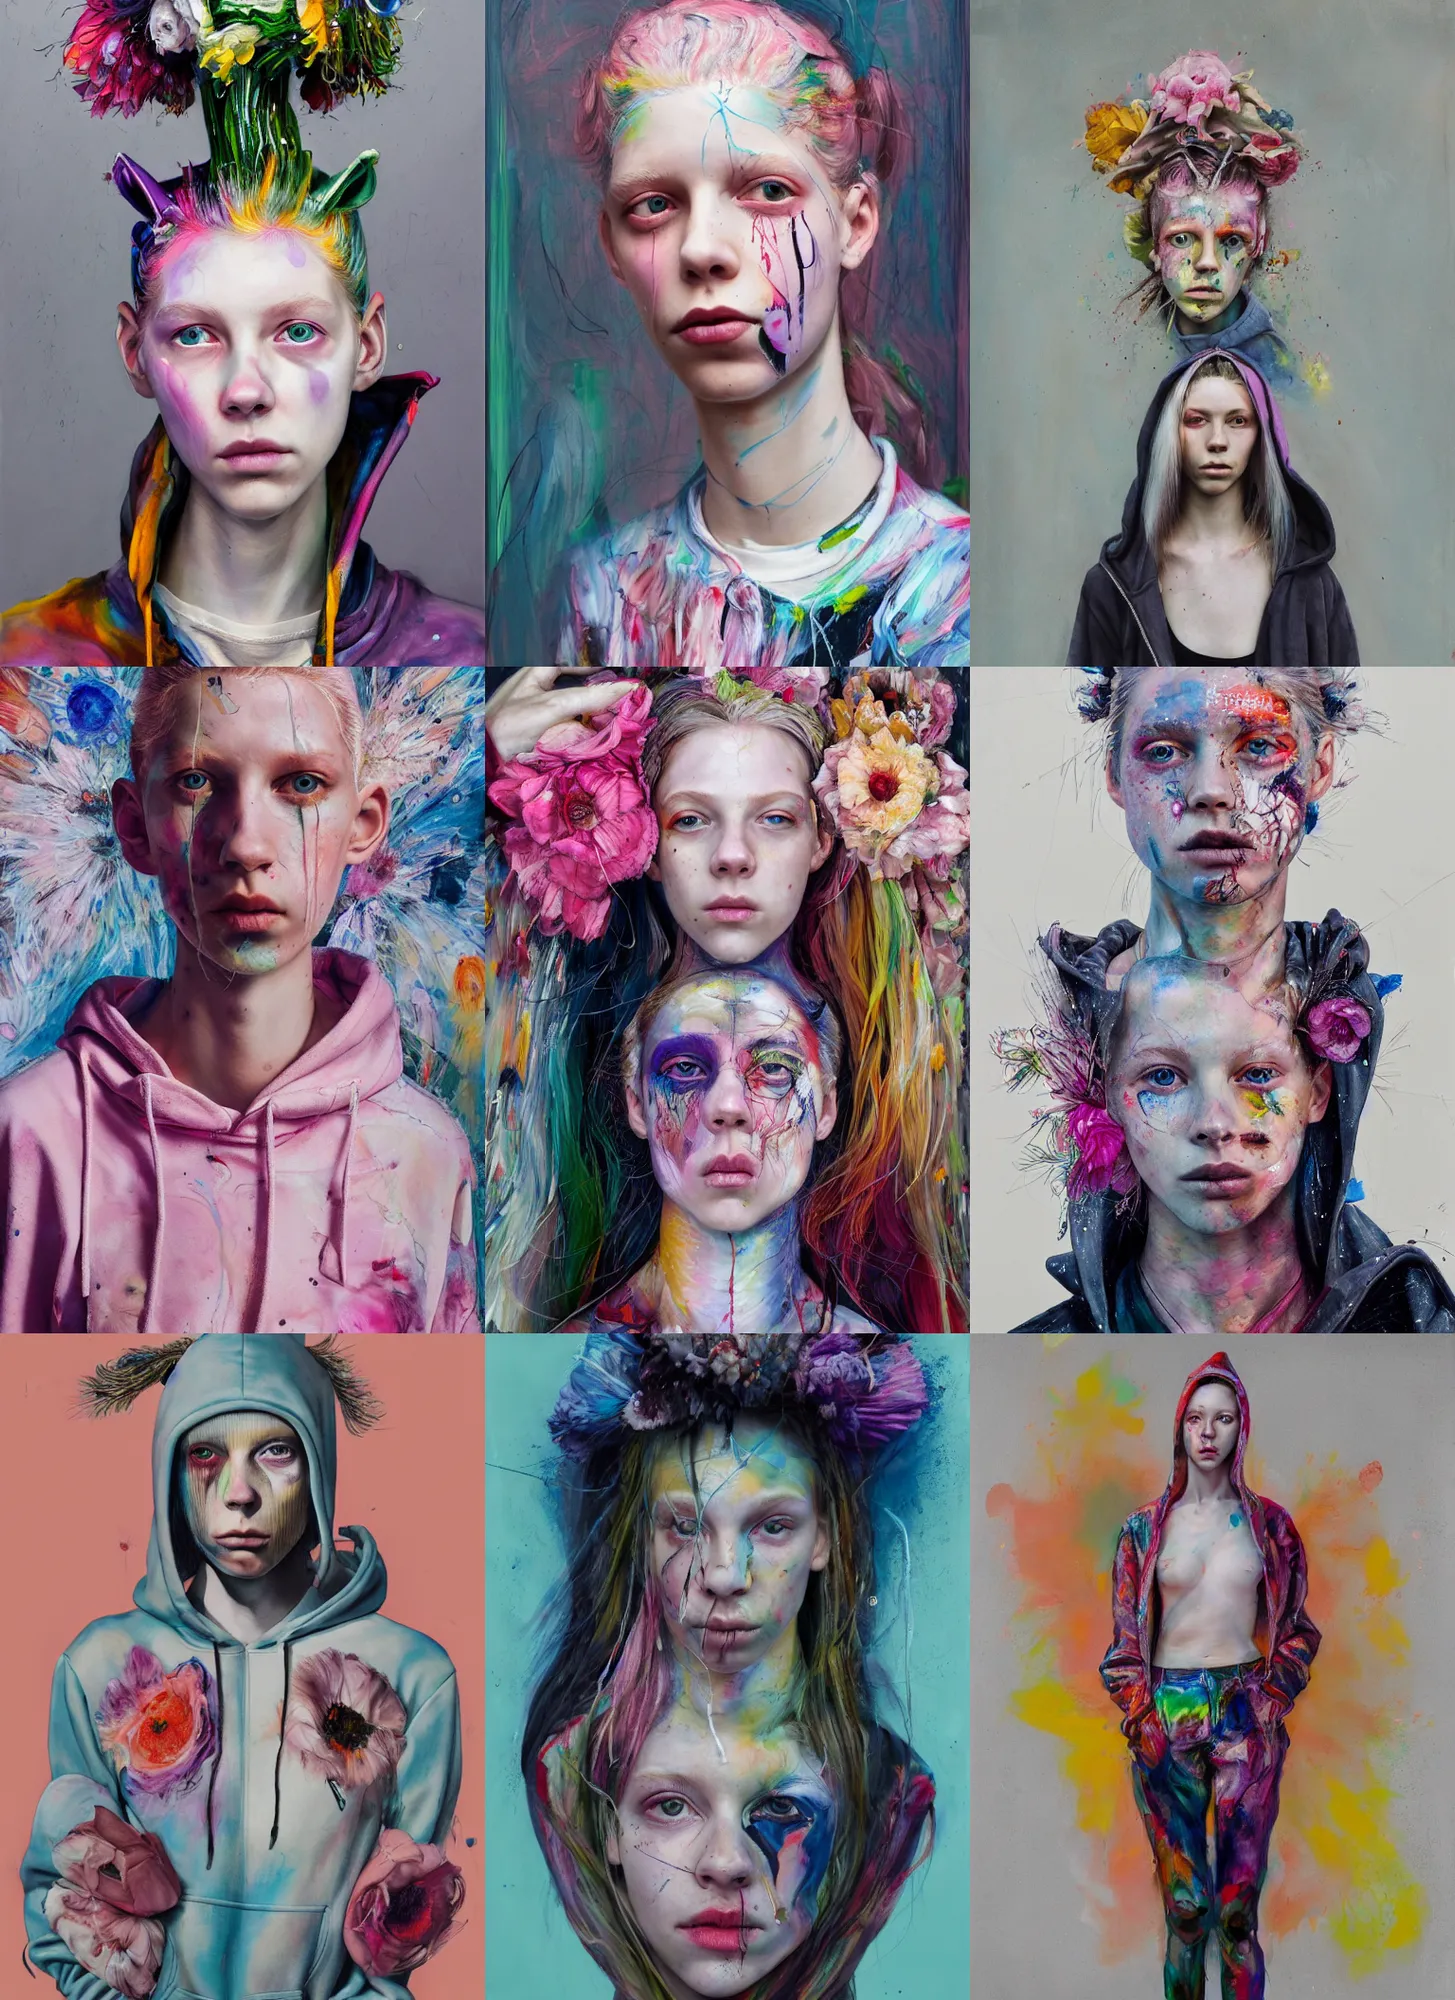 Prompt: 2 5 year old hunter schafer wearing a hoodie standing in a township street in the style of jenny saville, street fashion outfit, haute couture fashion shoot, mascara, full figure painting by martine johanna, jeremy mann, david choe, decorative flowers, 2 4 mm, die antwoord yolandi visser